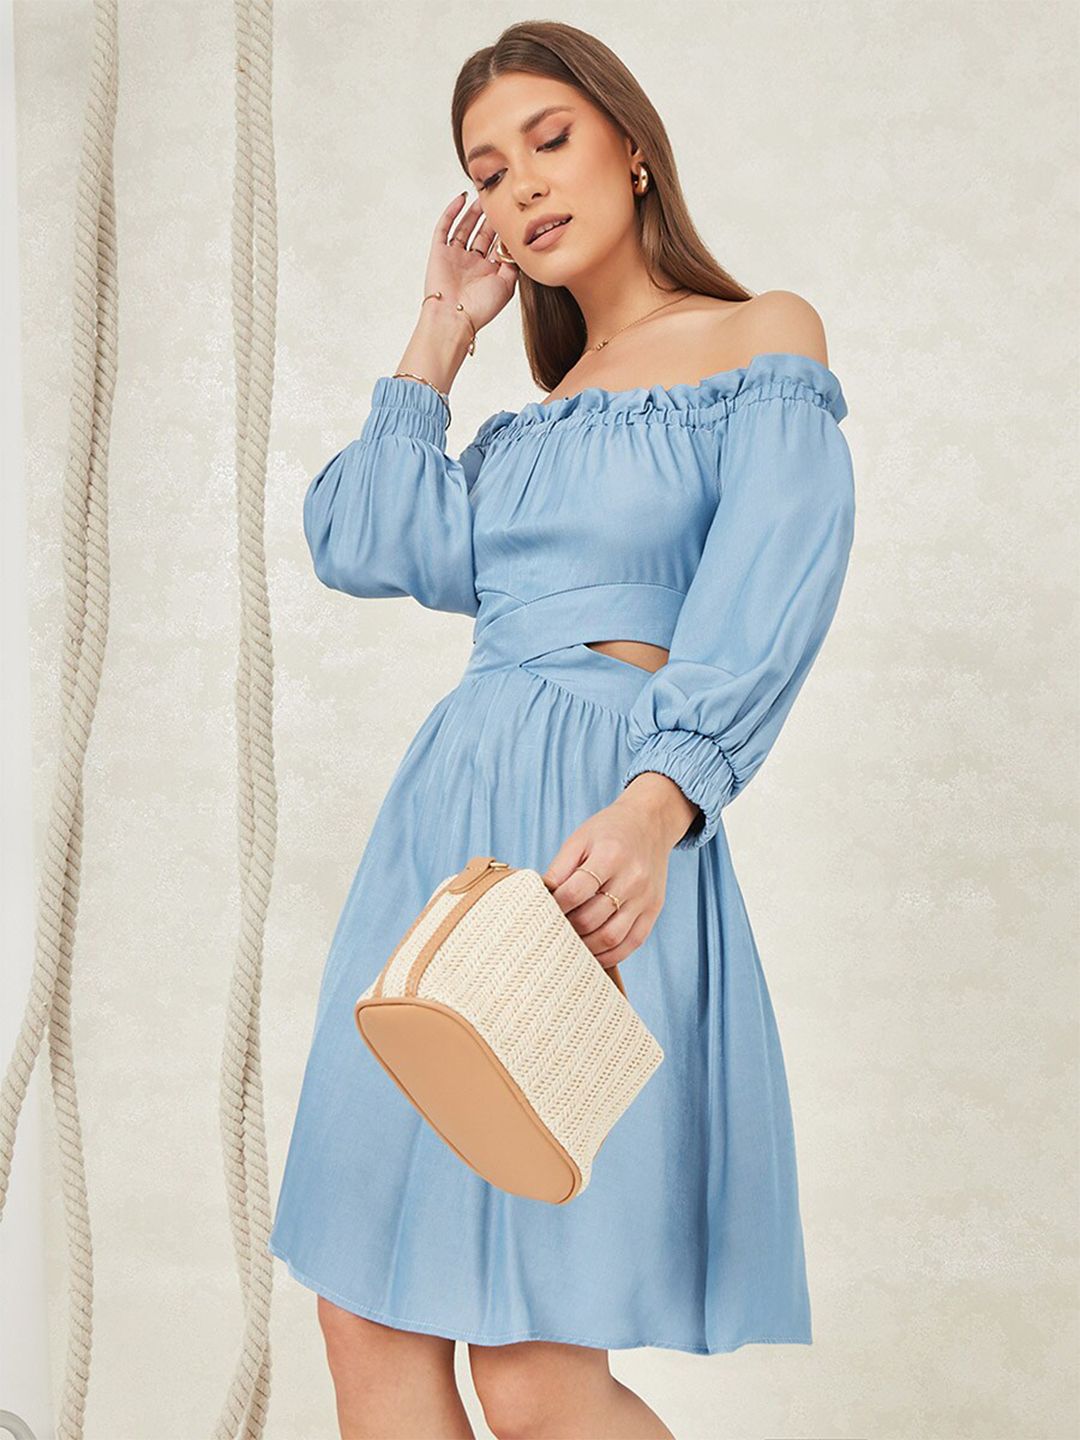 Styli Blue Off-Shoulder A-Line Dress Price in India